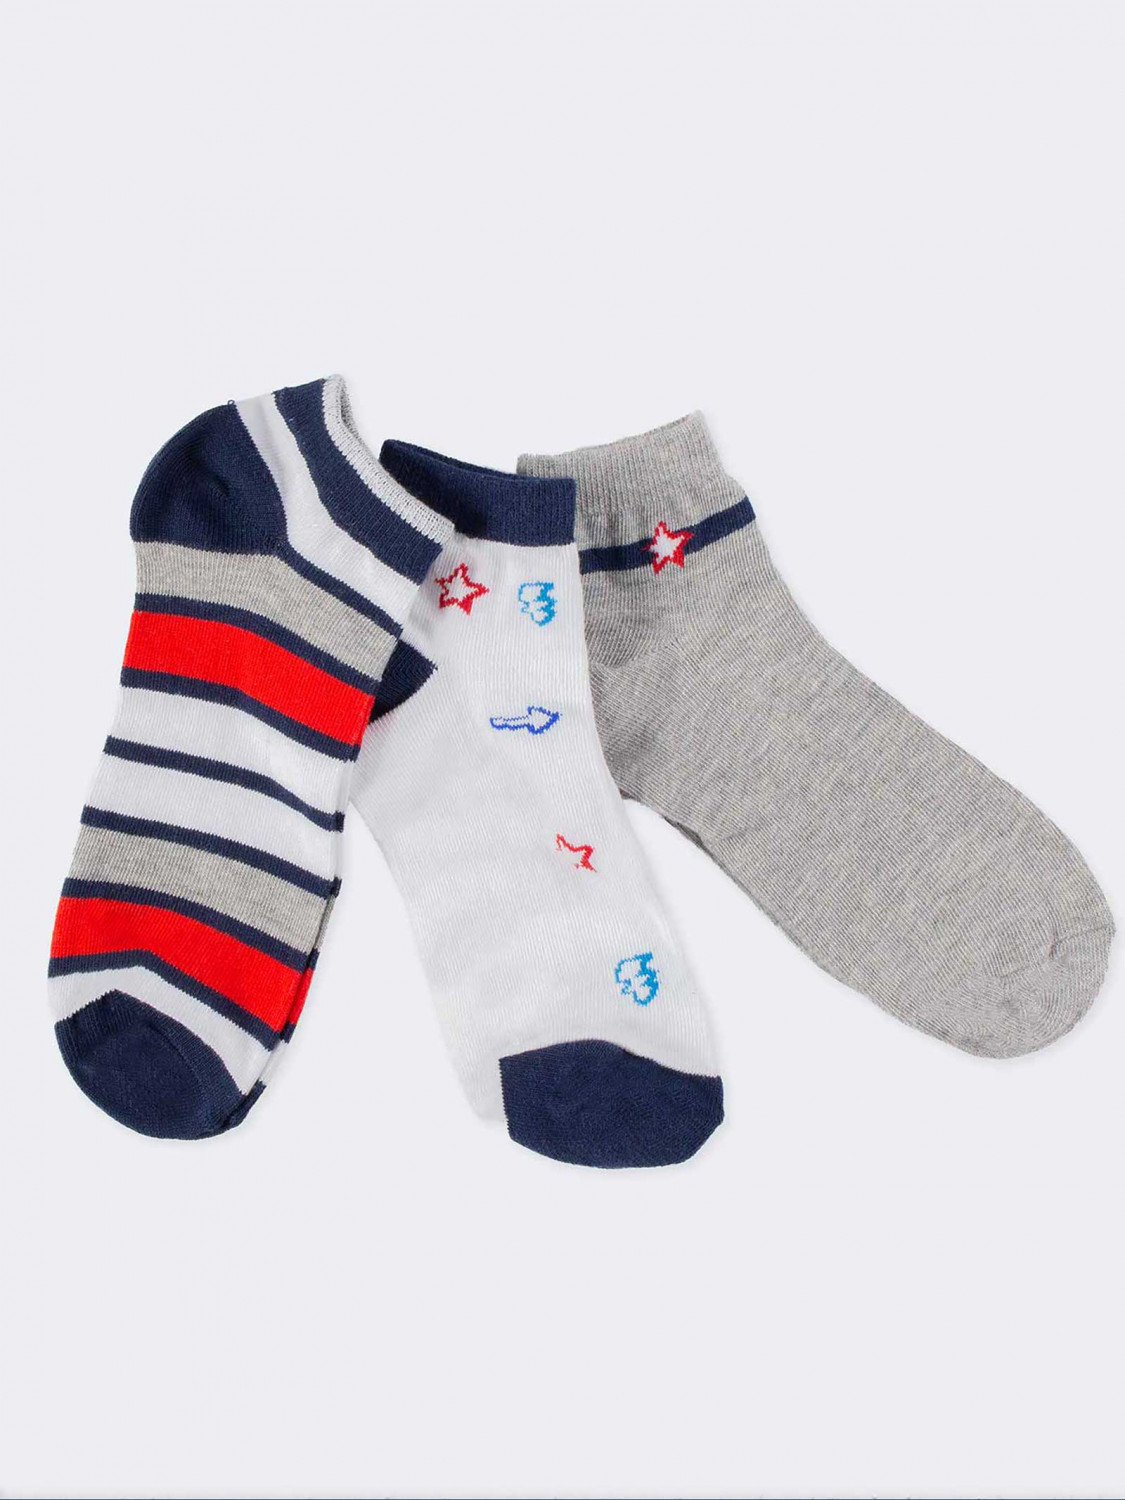 Tris striped and symbols pattern Kids Crew socks with watch